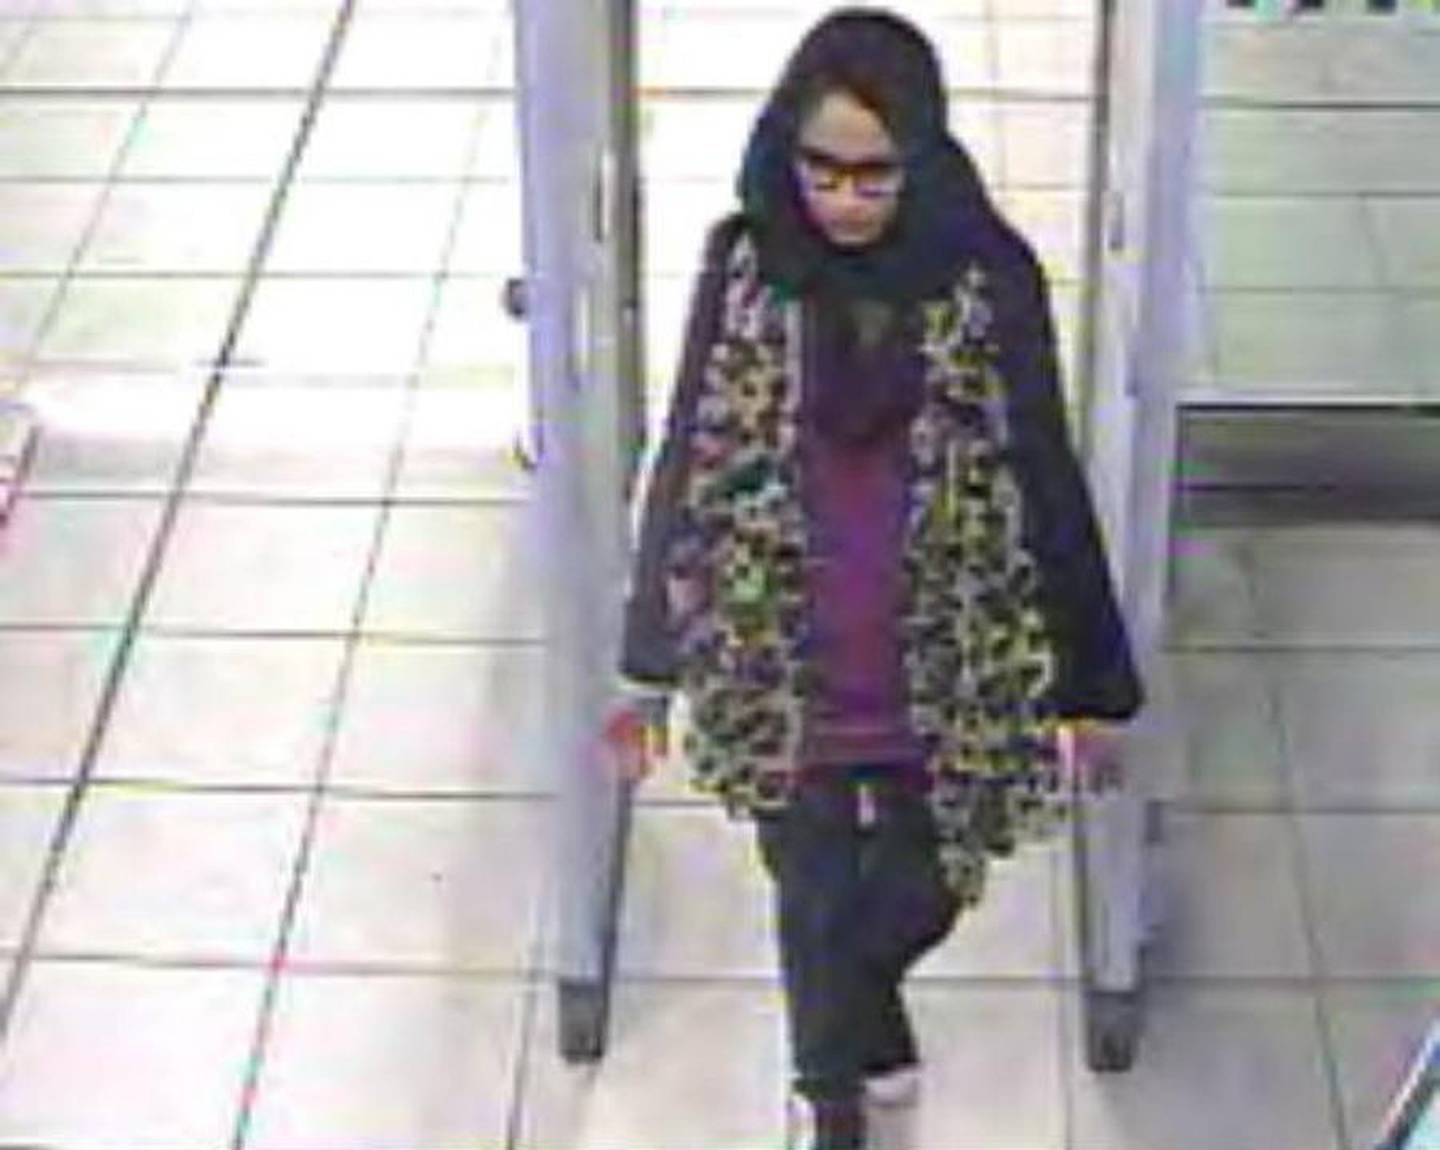 epa07369238 (FILE) - A handout photo made available by the London Metropolitan Police Service(MPS) on 20 February 2015 showing Shamima Begum one of three schoolgirls at Gatwick Airport, southern England, 17 February 2015 who have been reported missing and are believed to be making their way to Syria. Media reports on 14 February 2019 state that Shamima Begum, aged 19 who is in a refugee camp in Syria wants to return to Britain with her baby, her other two children both have died in the conflict. Shamima Begum said that one of her two school friends was killed in a bombing and the other's whereabouts is not known.  EPA/LONDON METROPLITAN POLICE / HANDOUT  HANDOUT EDITORIAL USE ONLY/NO SALES *** Local Caption *** 51809500